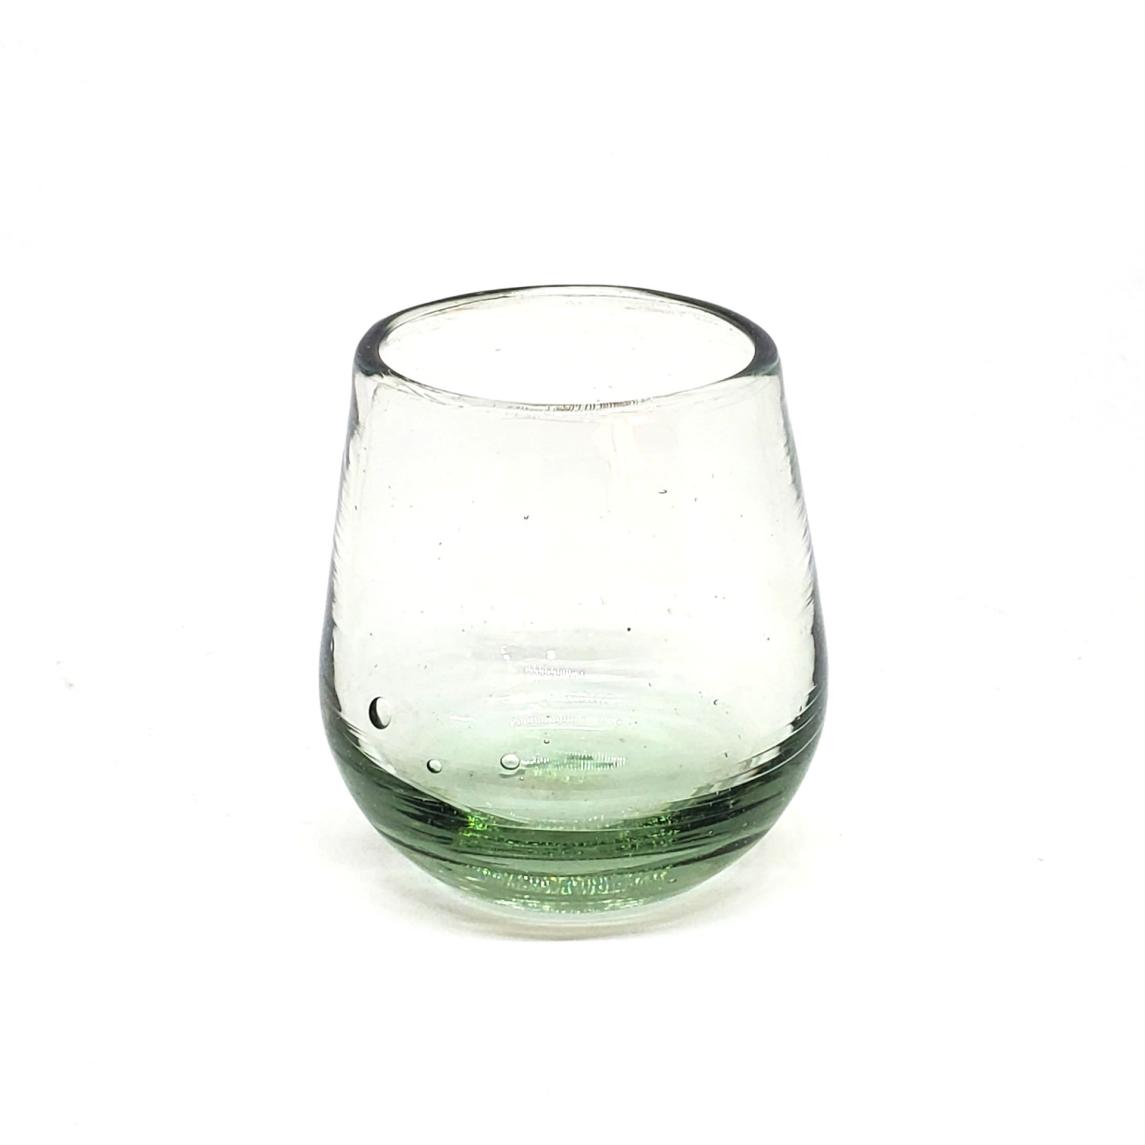 Sale Items / Clear 6 oz Roly Poly Glasses (set of 6) / Our Clear Blown Glasses are individually handcrafted from recycled glass, making each of them unique works of art.